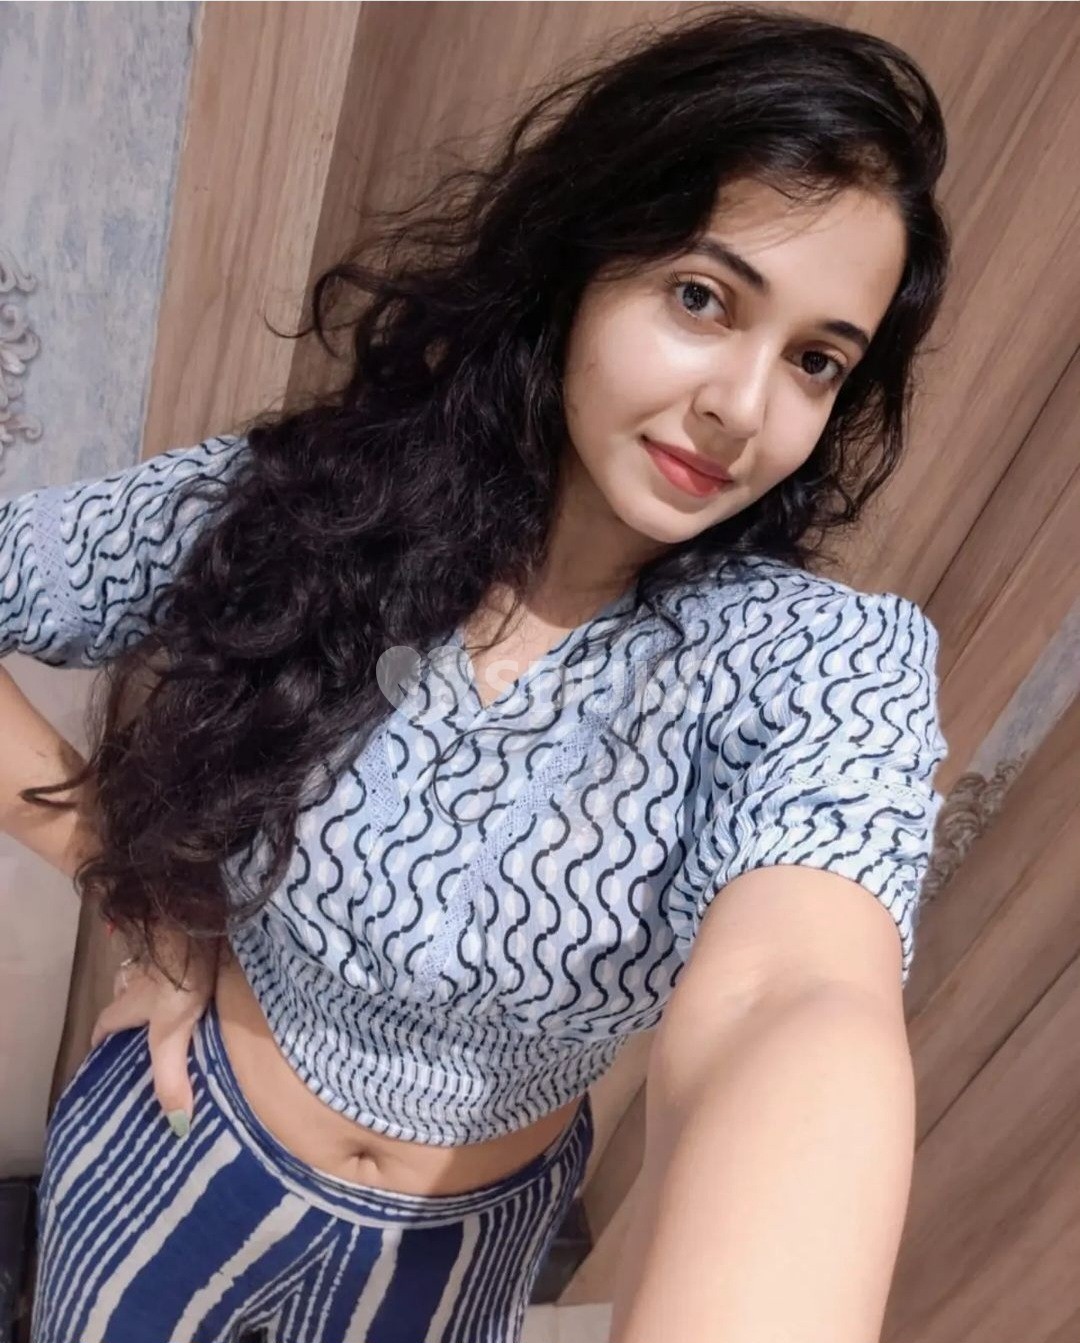 Mangalore ✅ 24x7 AFFORDABLE CHEAPEST RATE SAFE CALL GIRL SERVICE AVAILABLE OUTCALL AVAILABLE,,